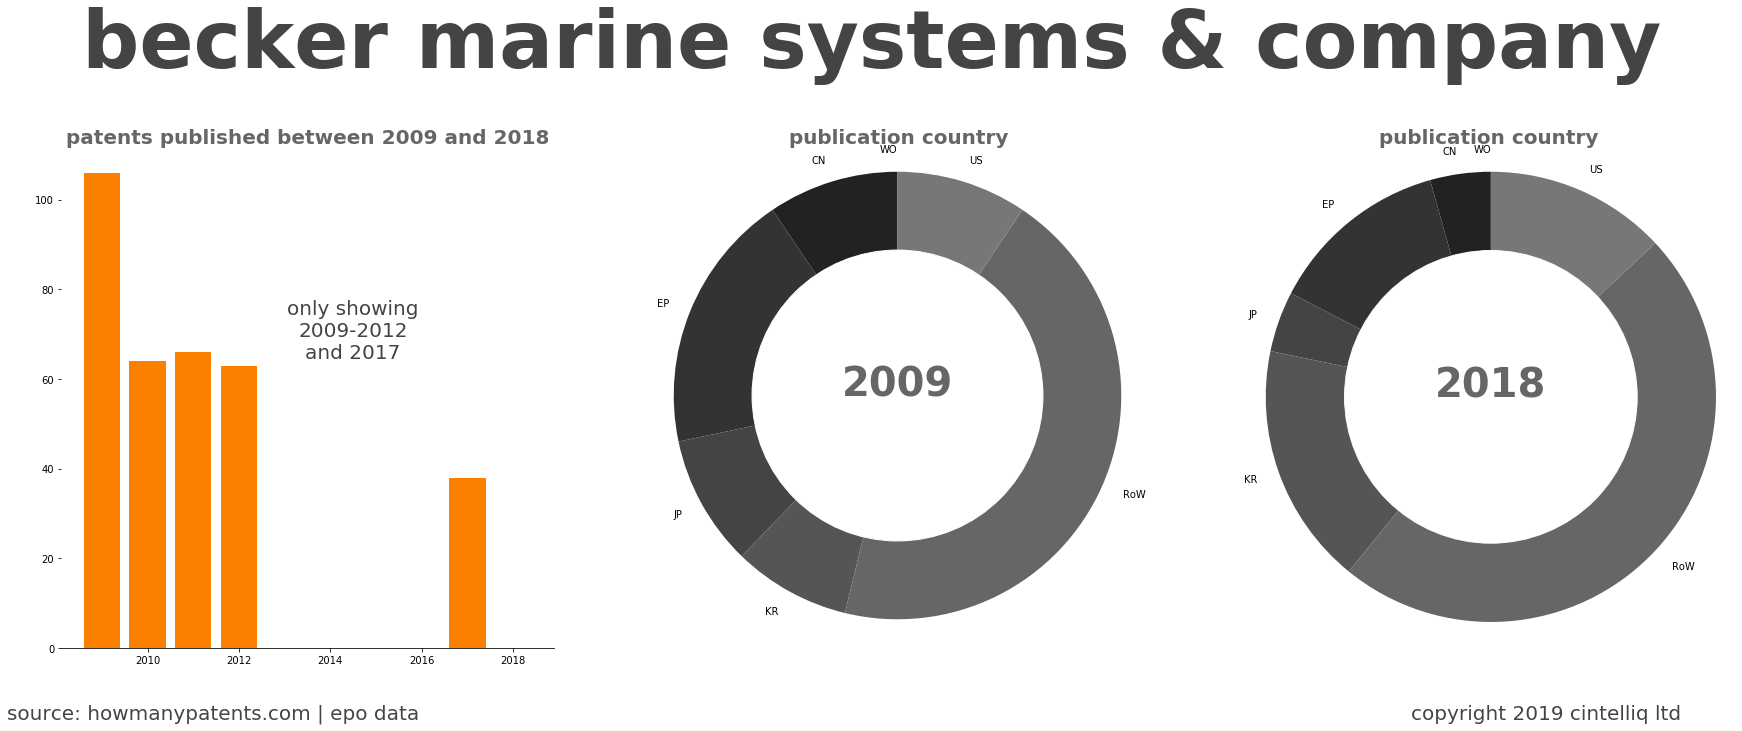 summary of patents for Becker Marine Systems & Company